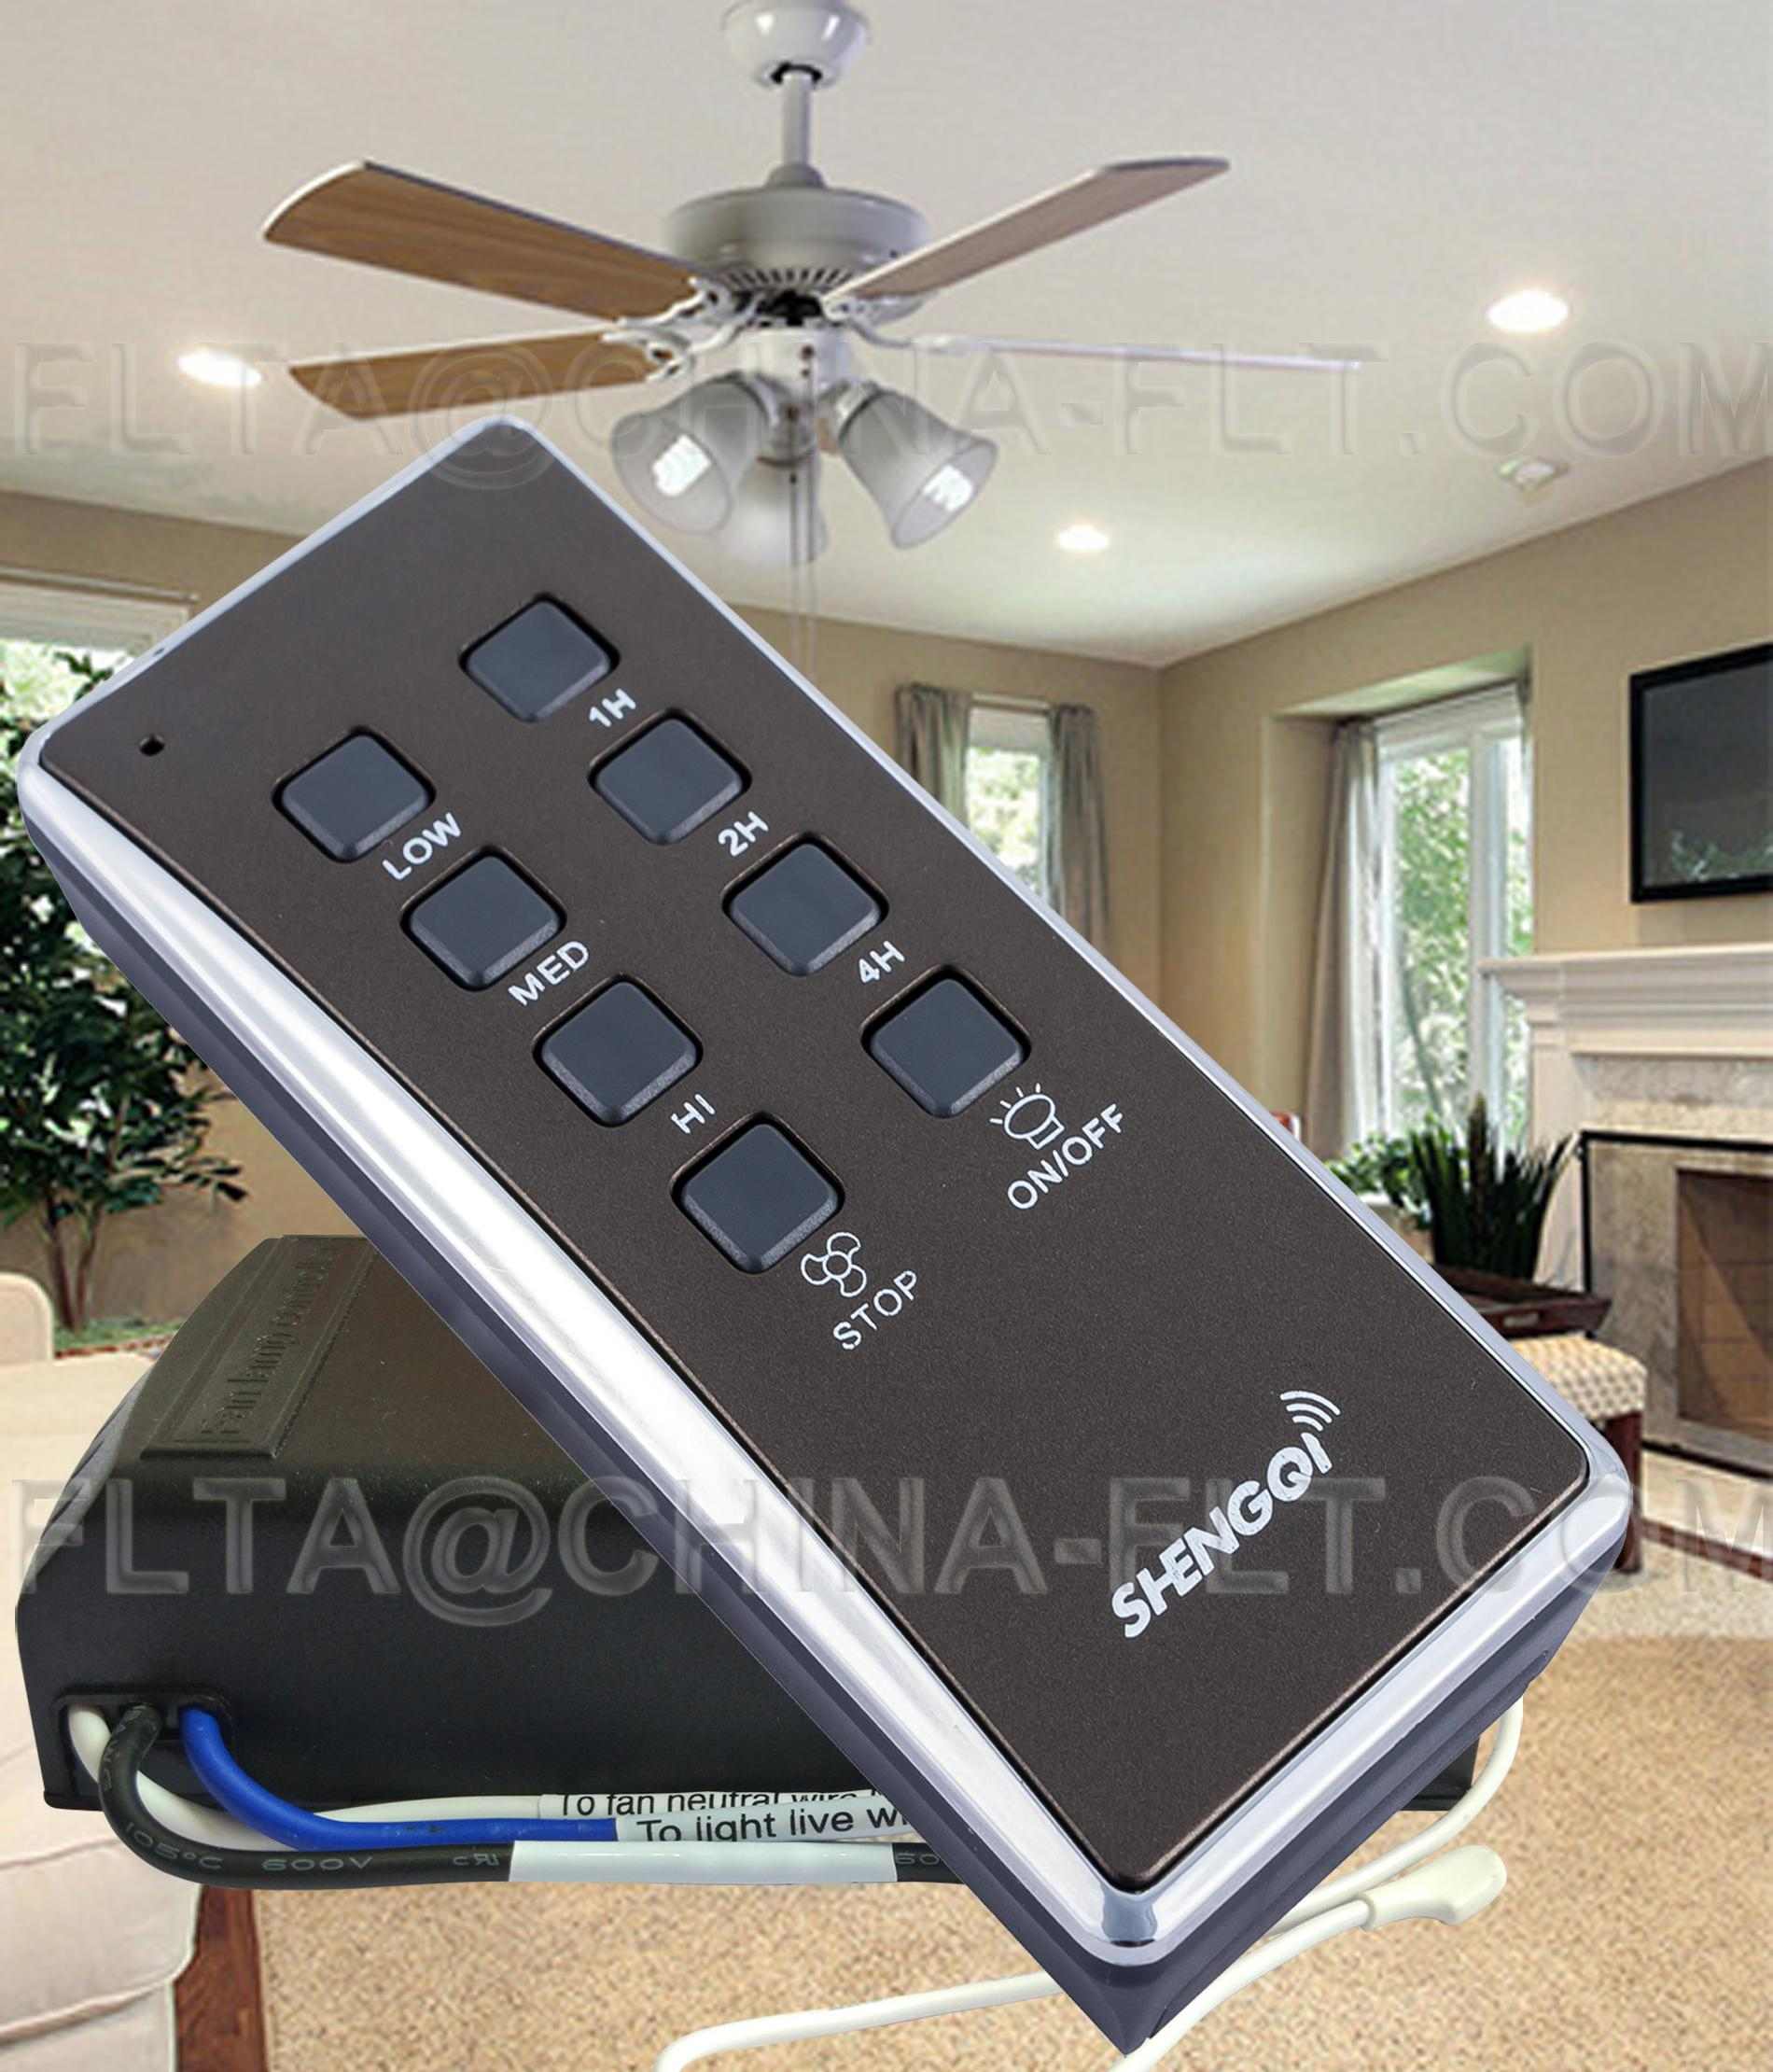 2020 Ceiling Fan Light Remote Control Switch With 3 Speed Control Timer Learning Function Able For Hunter Fan From Ec2shop 581 Dhgate regarding dimensions 1900 X 2220